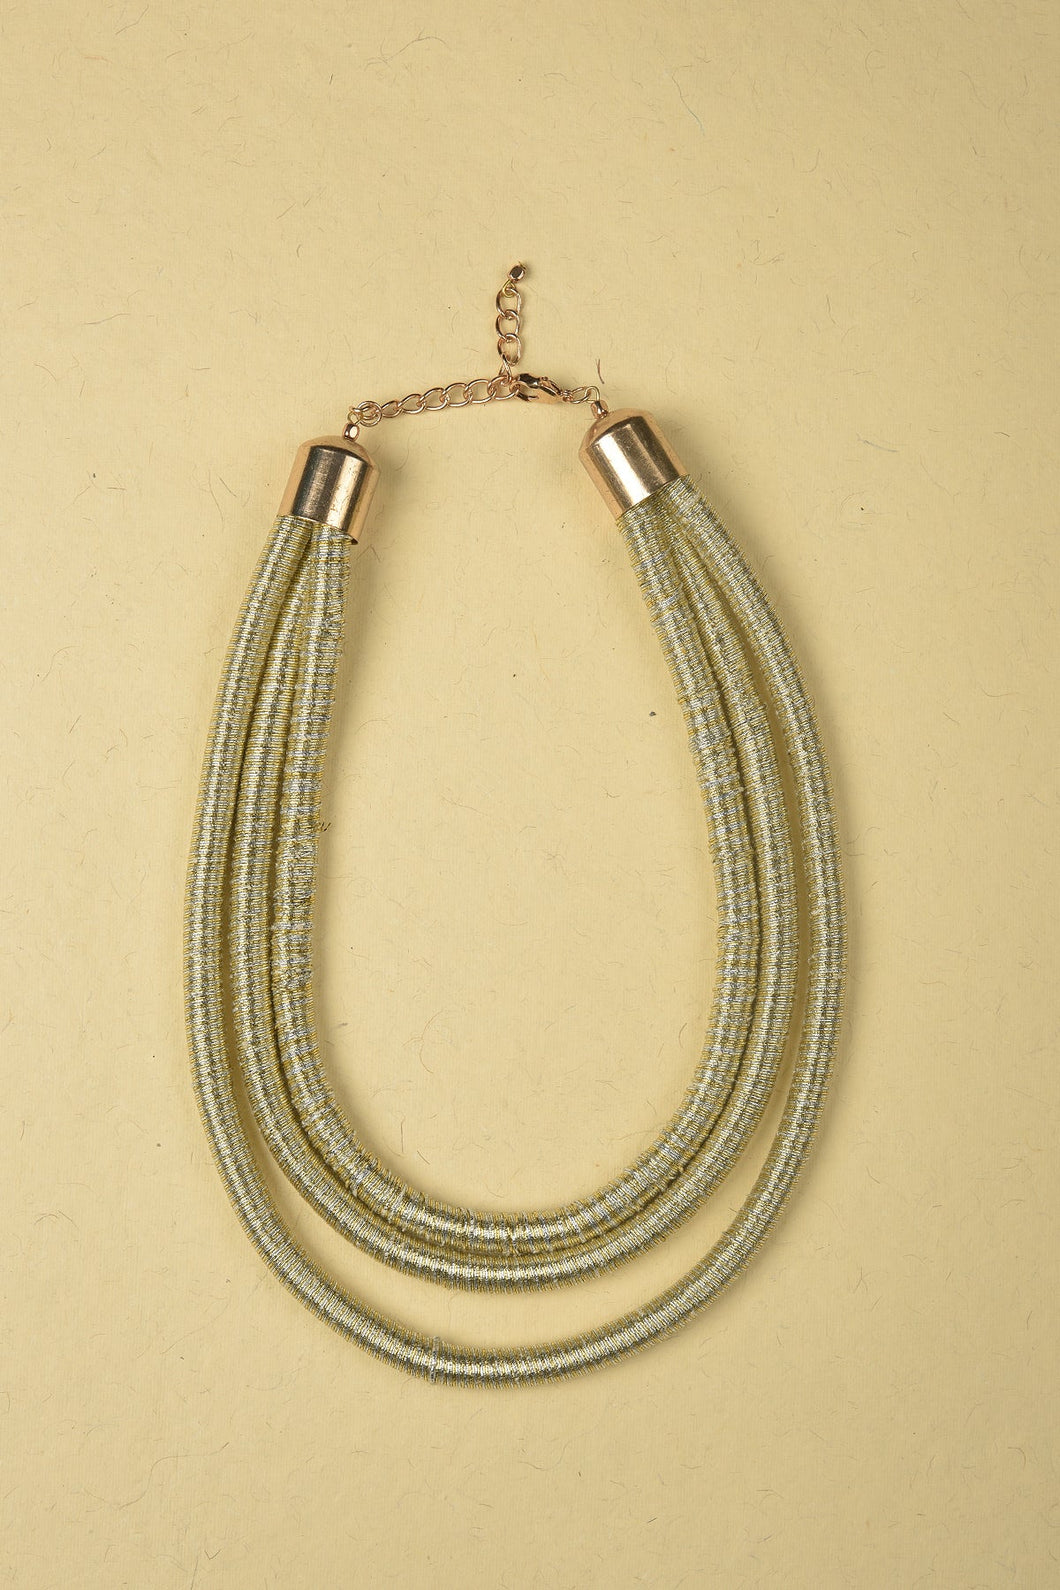 Small Necklace made of Jute, Iron Rings and Iron Chain